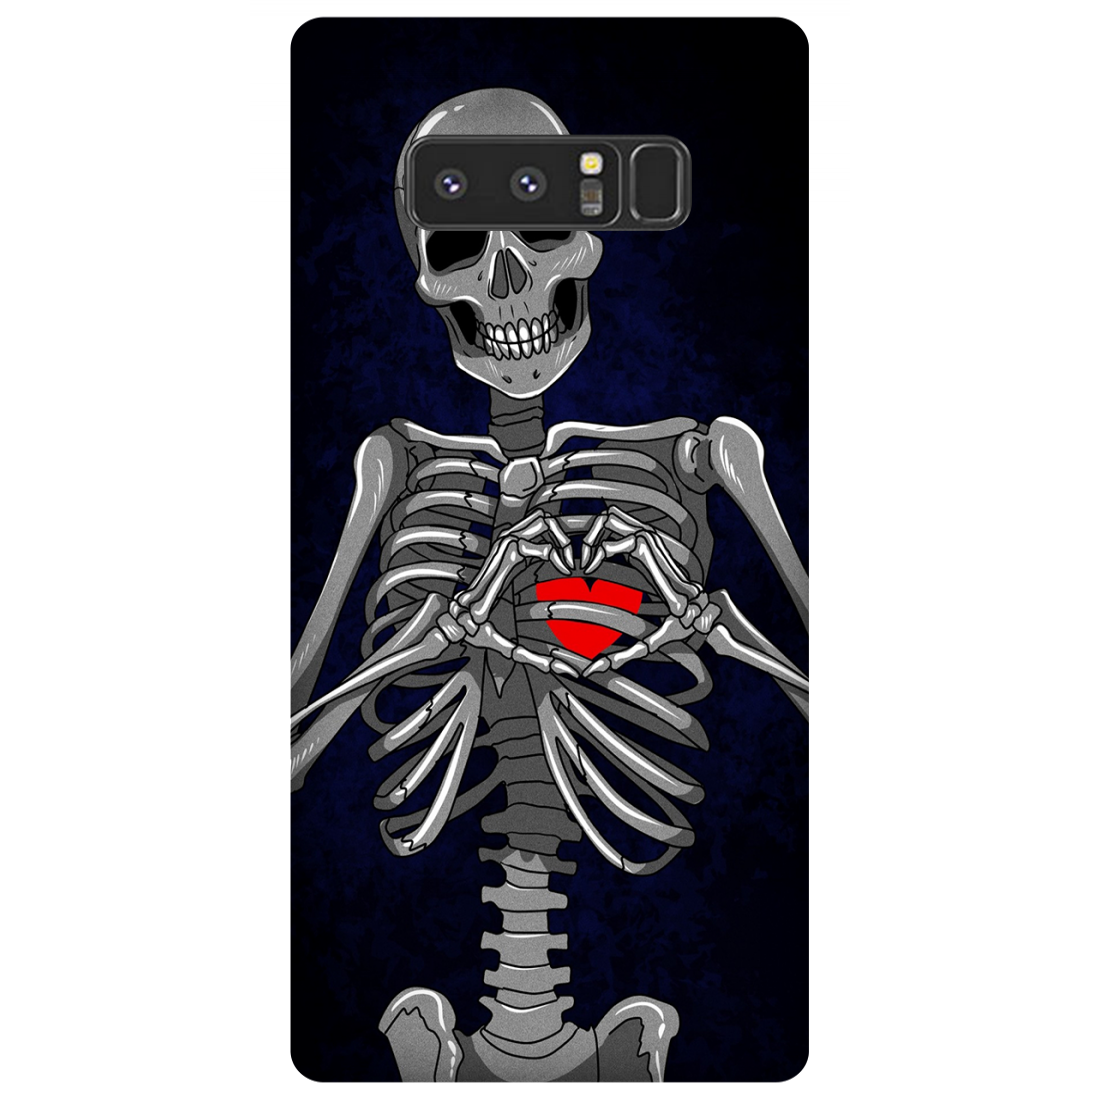 Embracing Skeleton with a Heart Case Samsung Galaxy Note 8